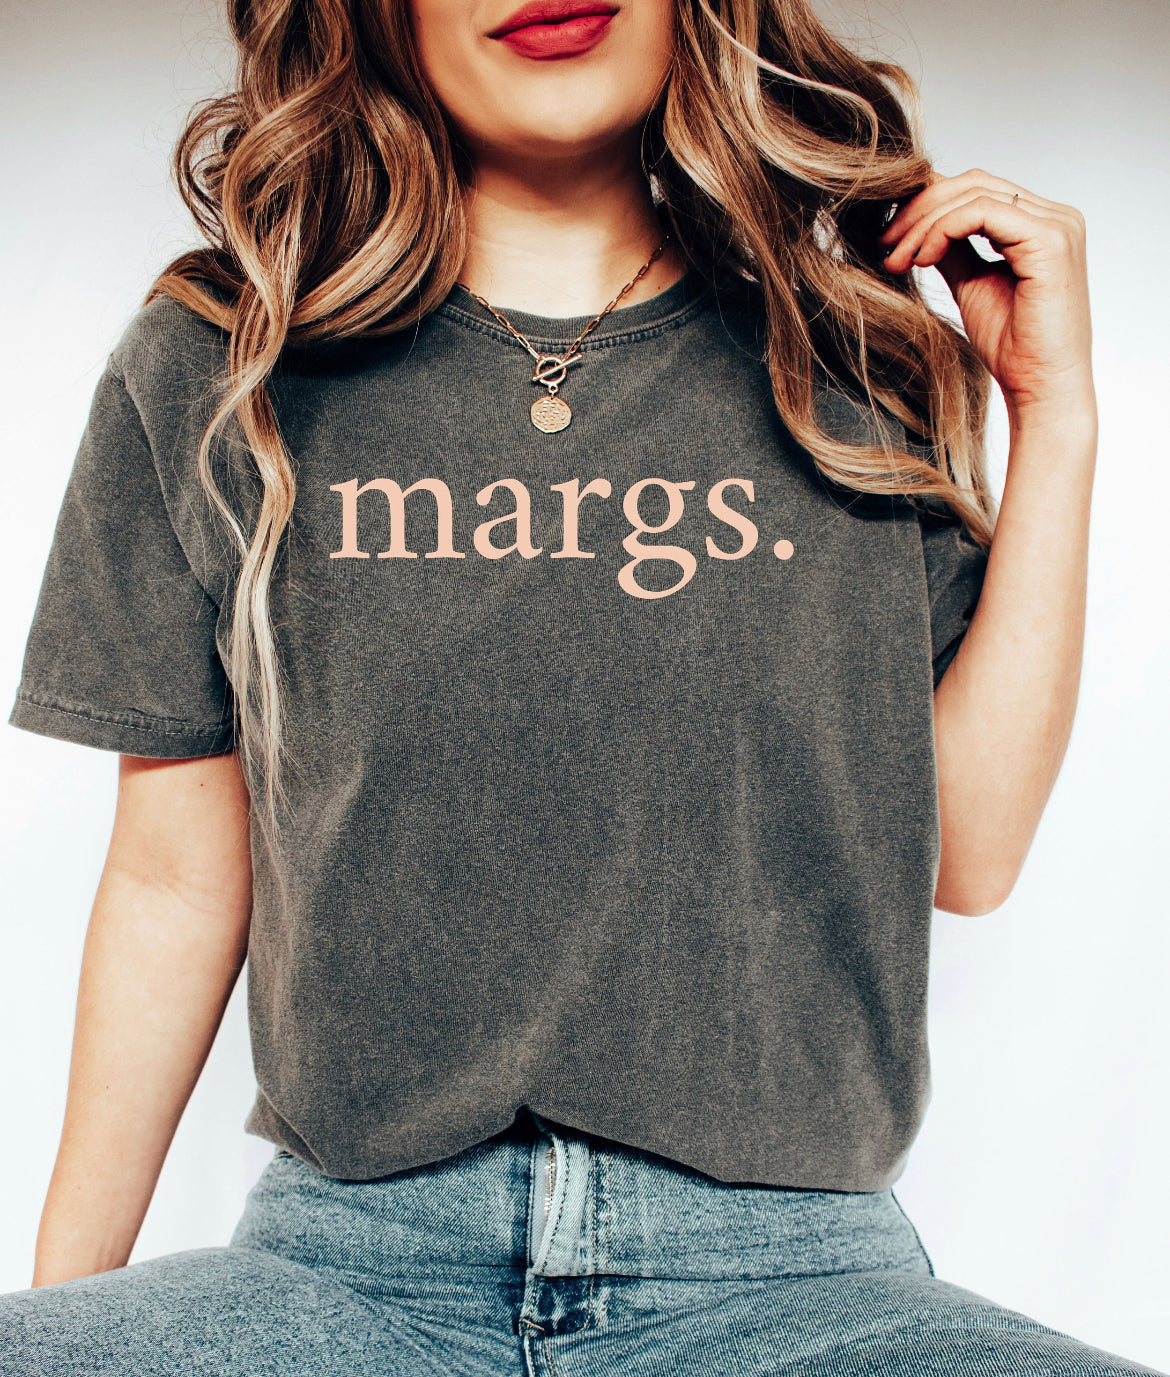 Margs(RTP- Ready to Print) – 615transfers